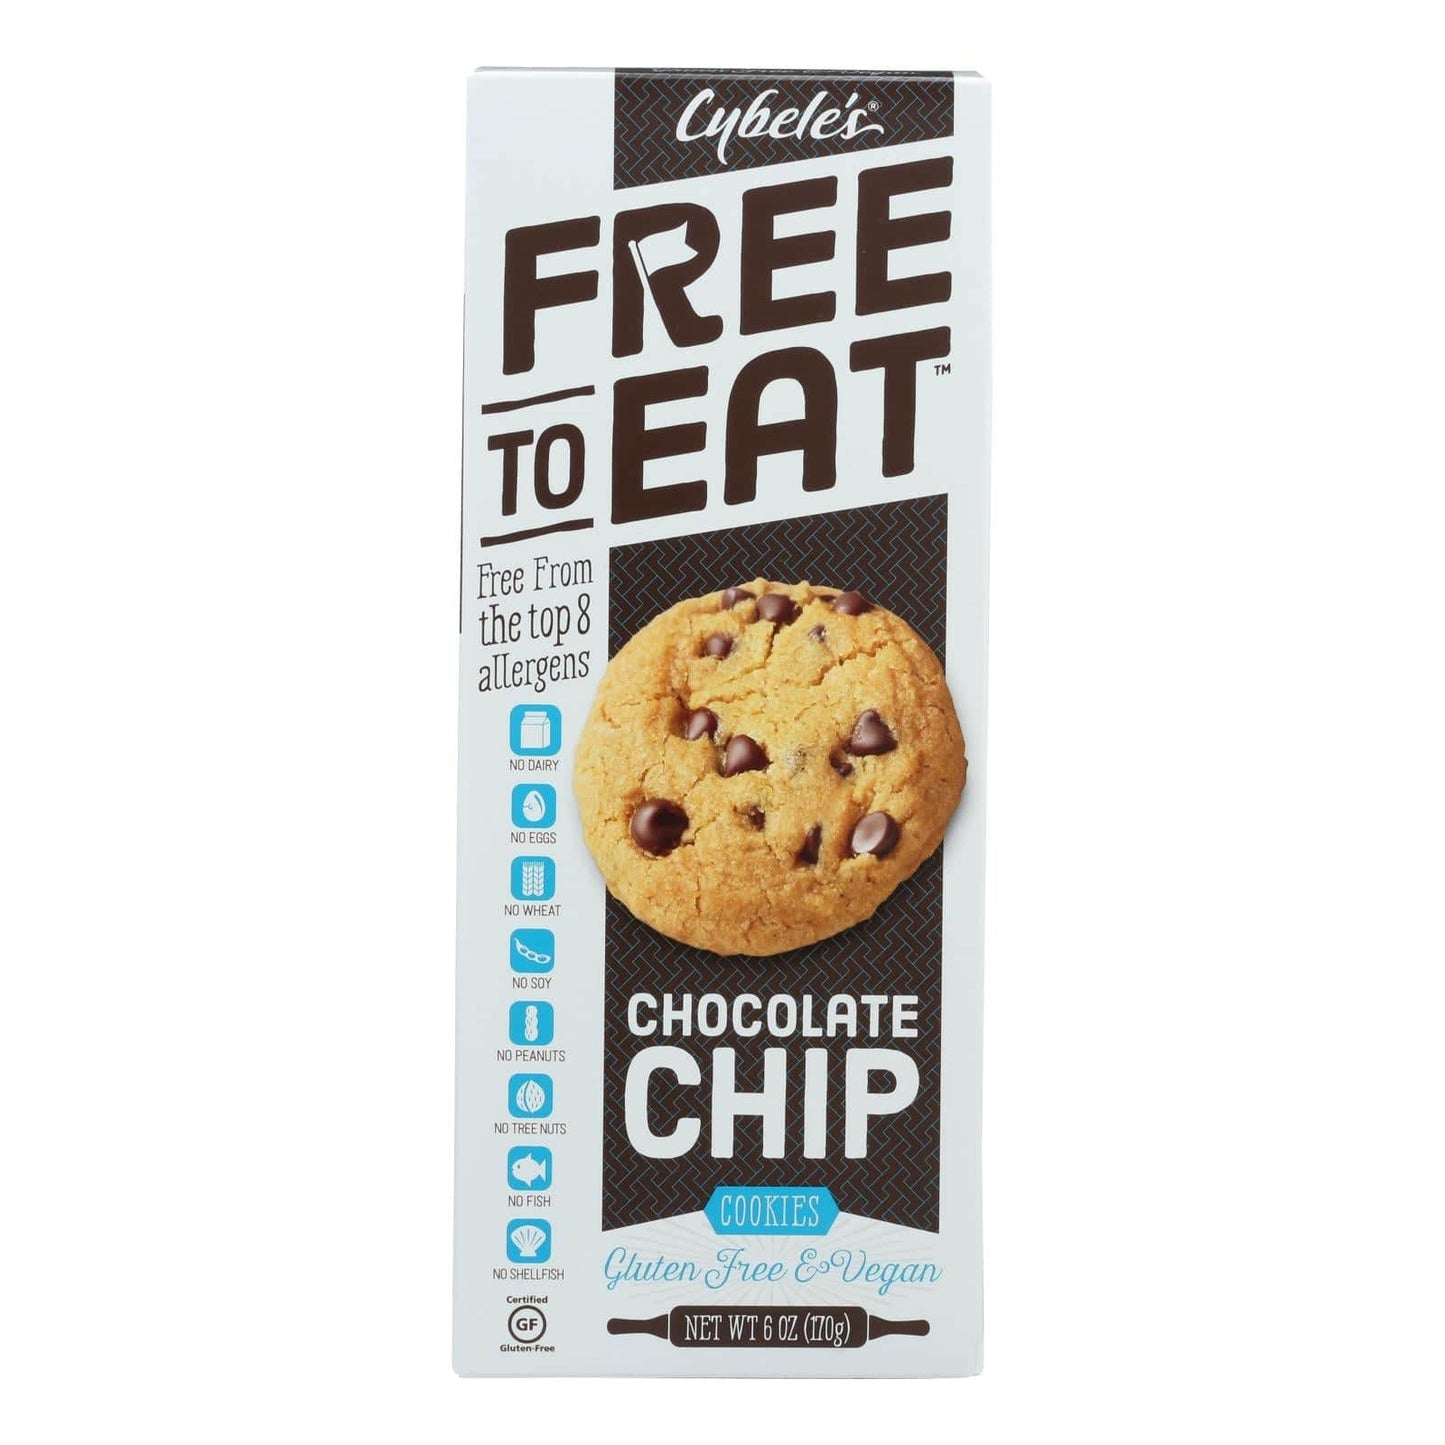 Cybel's Free To Eat Chocolate Chip Cookies - Case Of 6 - 6 Oz. | OnlyNaturals.us